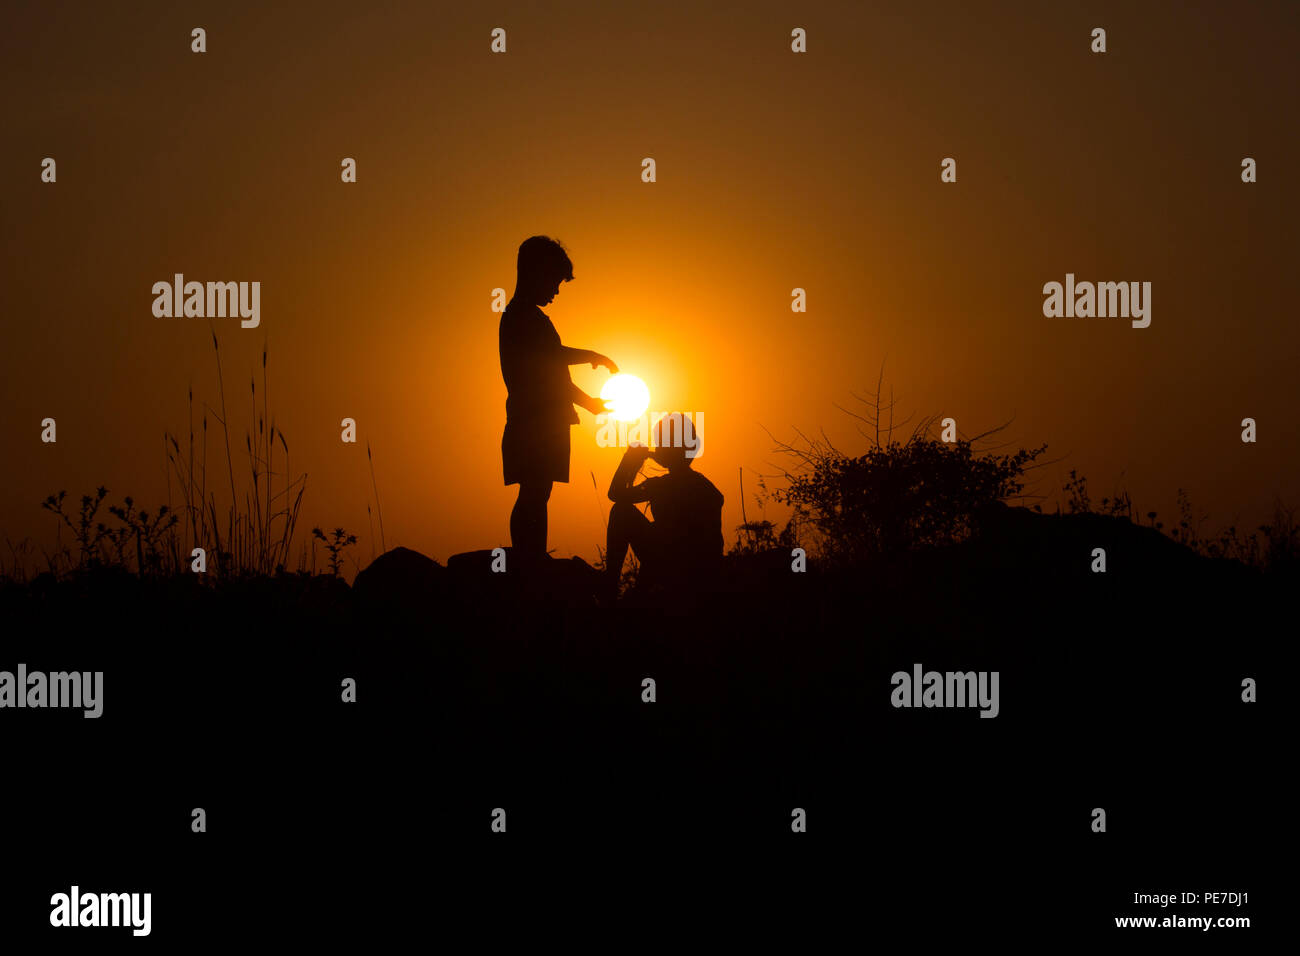 A young boy is offering the setting sun to the young girl next to him Stock Photo